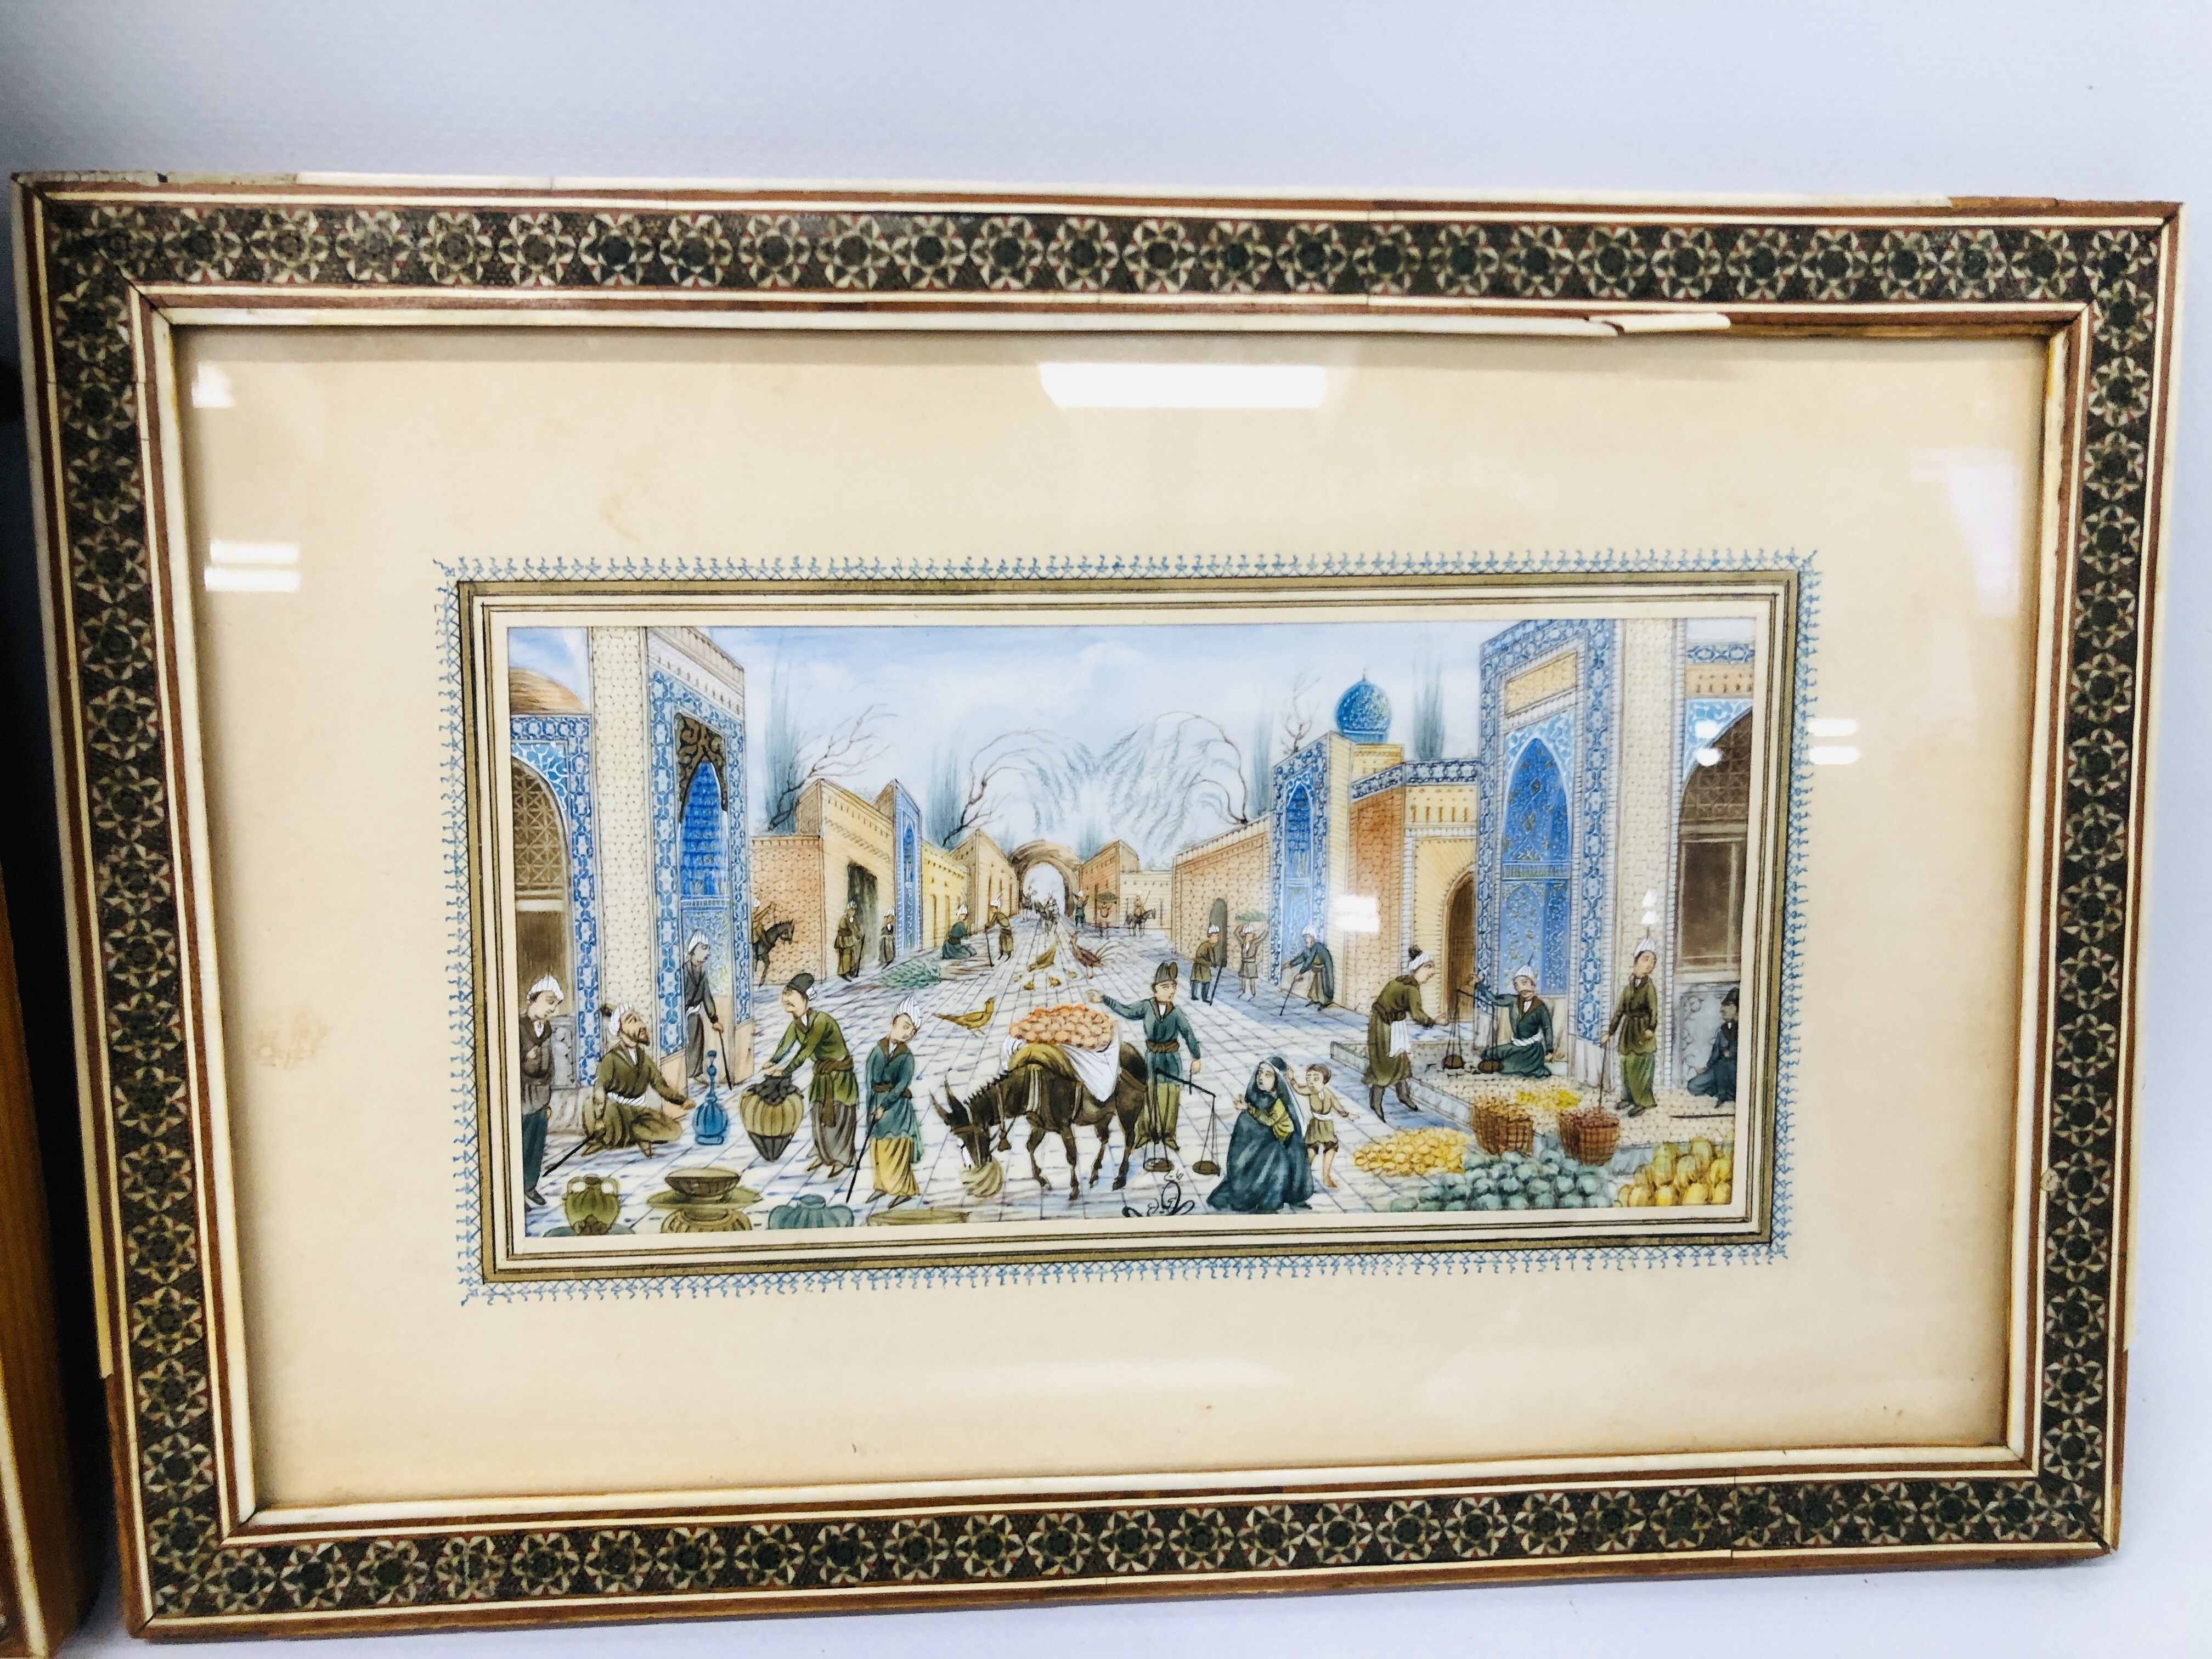 COLLECTION OF 10 VINTAGE PERSIAN PICTURE FRAMES INLAID WITH MICRO MOSAIC IN GEOMETRIC DESIGN, - Image 14 of 14